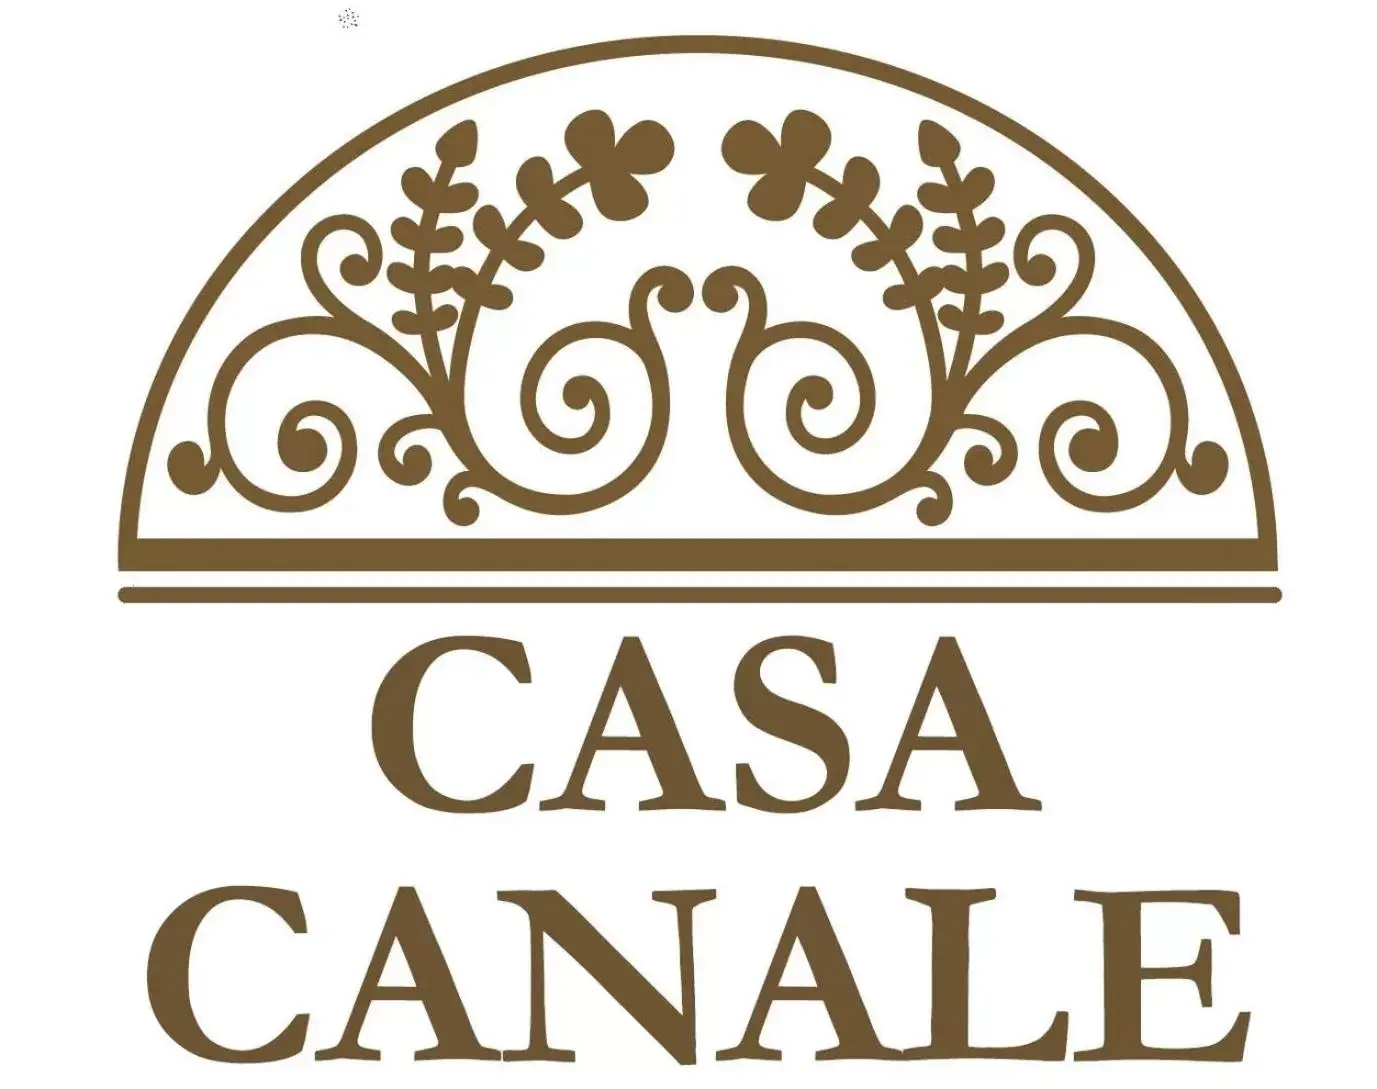 Property logo or sign in Casa Canale